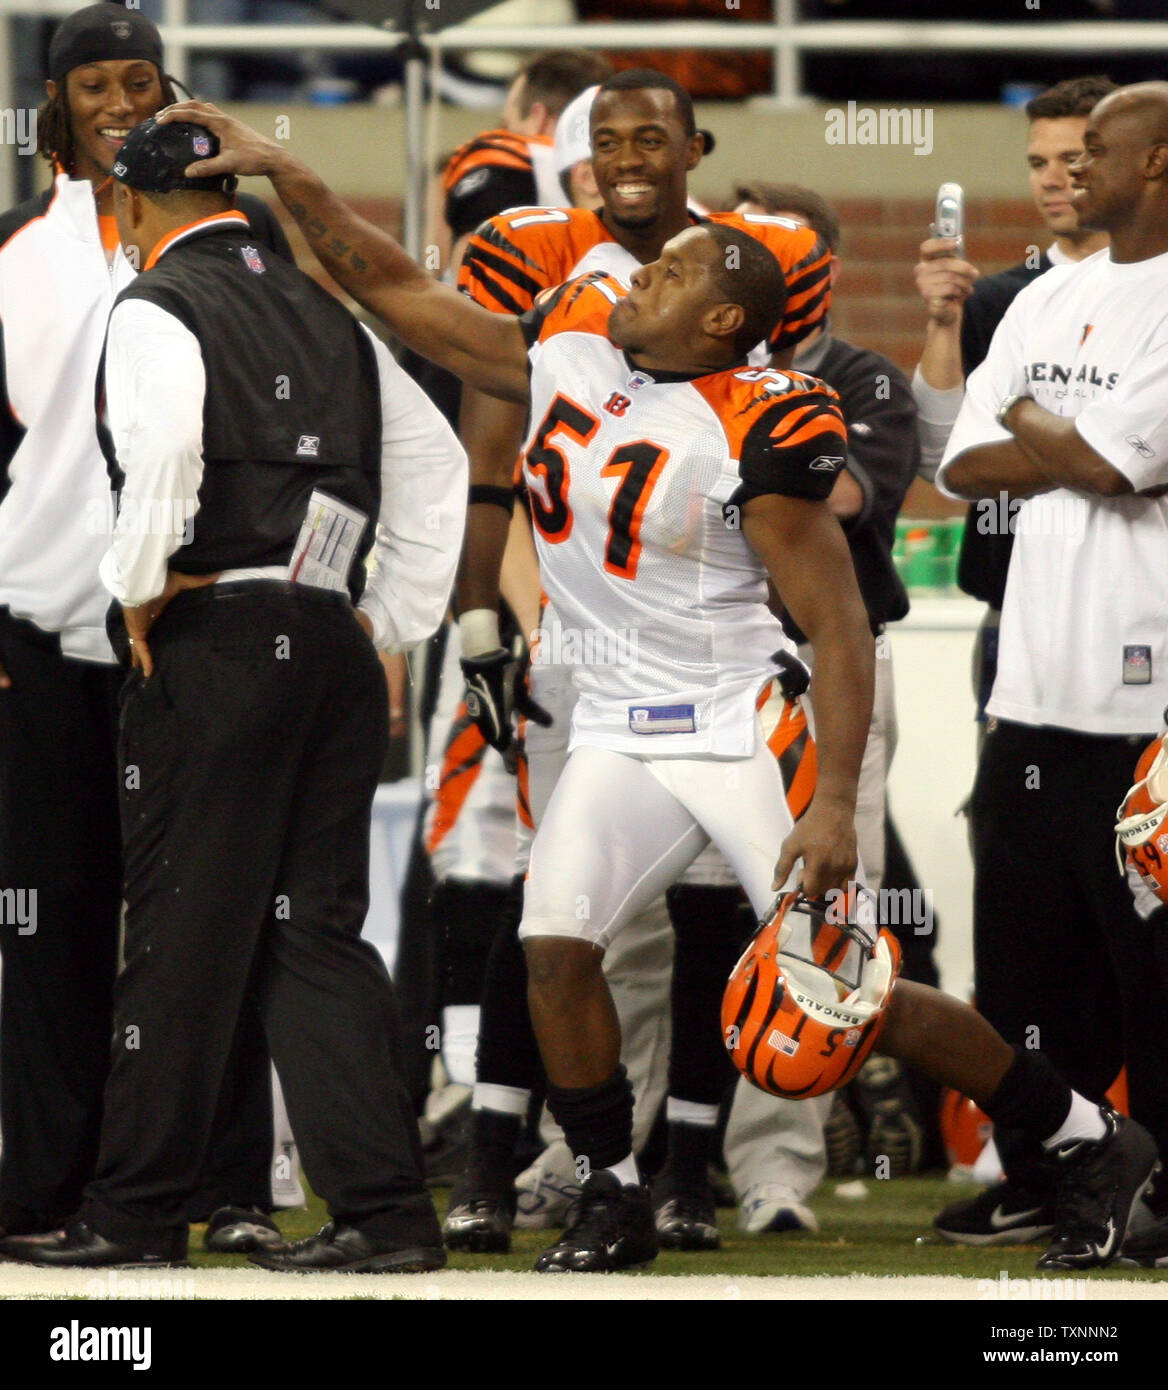 Cincinnati Bengals linebacker Odell Thurman (51) teases head coach Marvin Lewis after the coach got water dumped on him in the closing minutes against the Detroit Lions December 18, 2005 at Ford Field in Detroit. The Bengals defeated the Lions 41-17 and captured the AFC North Division Championship.  (UPI Photo/Scott R. Galvin) Stock Photo